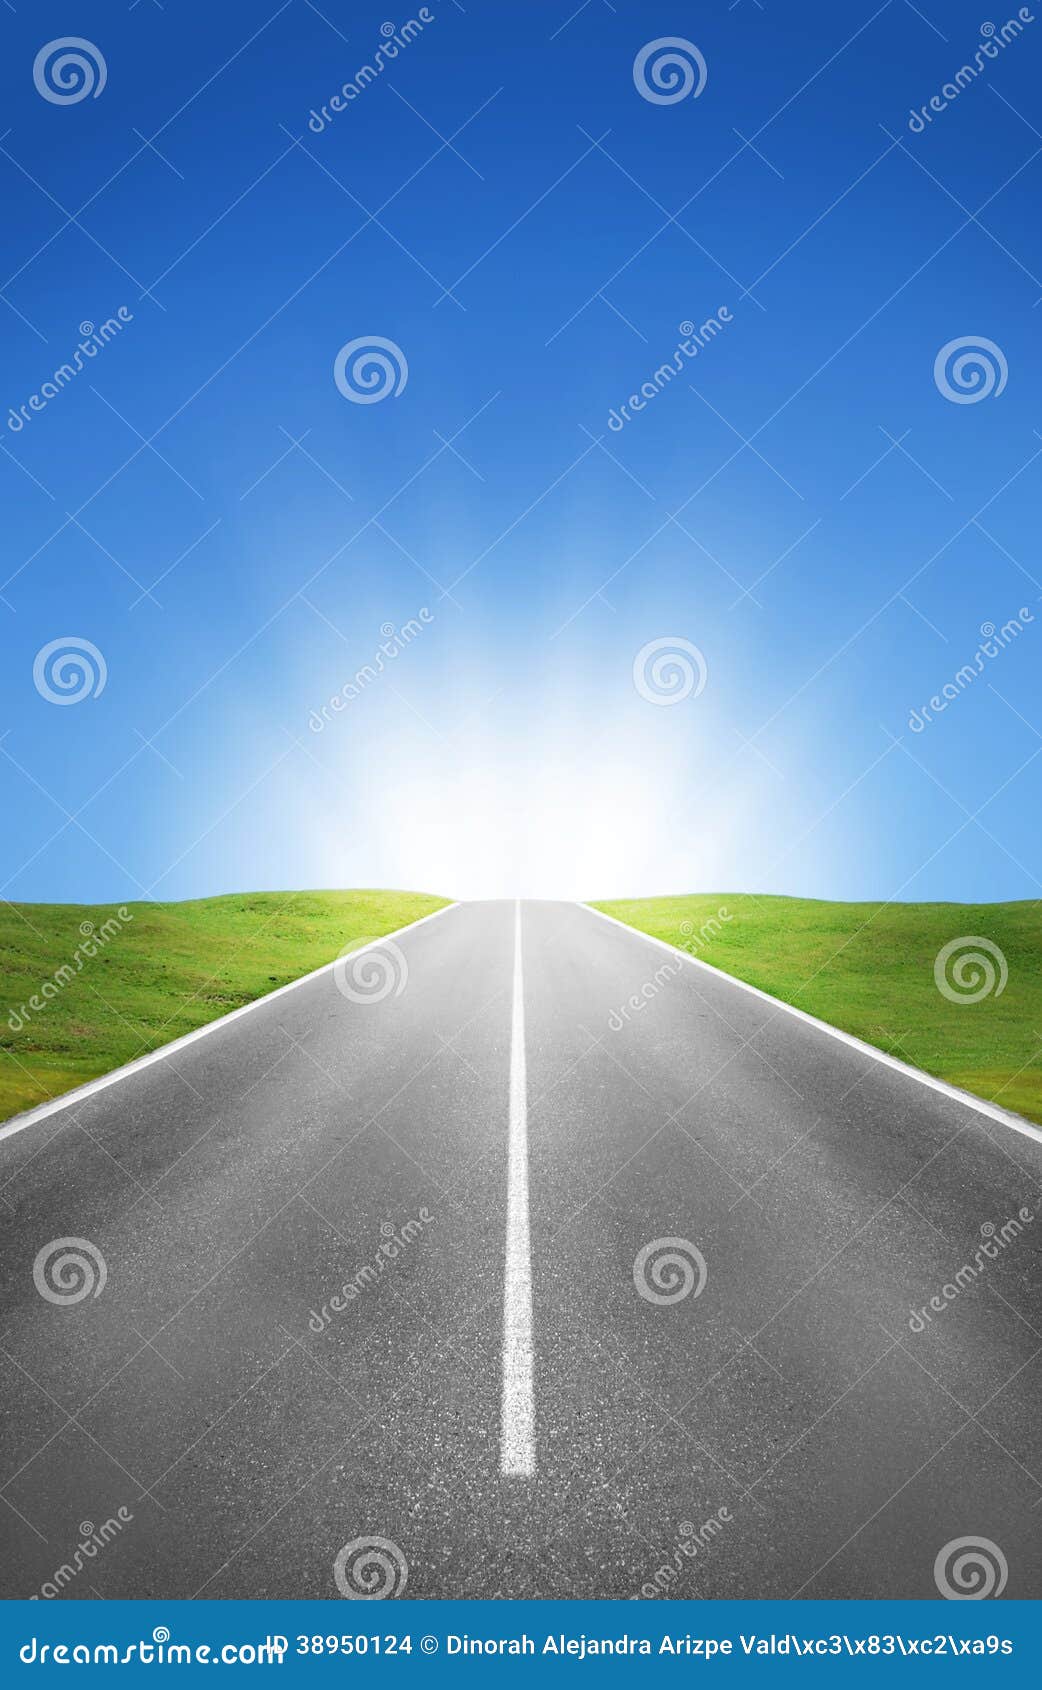 Road Fields And Blue Sky Stock Photo Image Of Driving 38950124